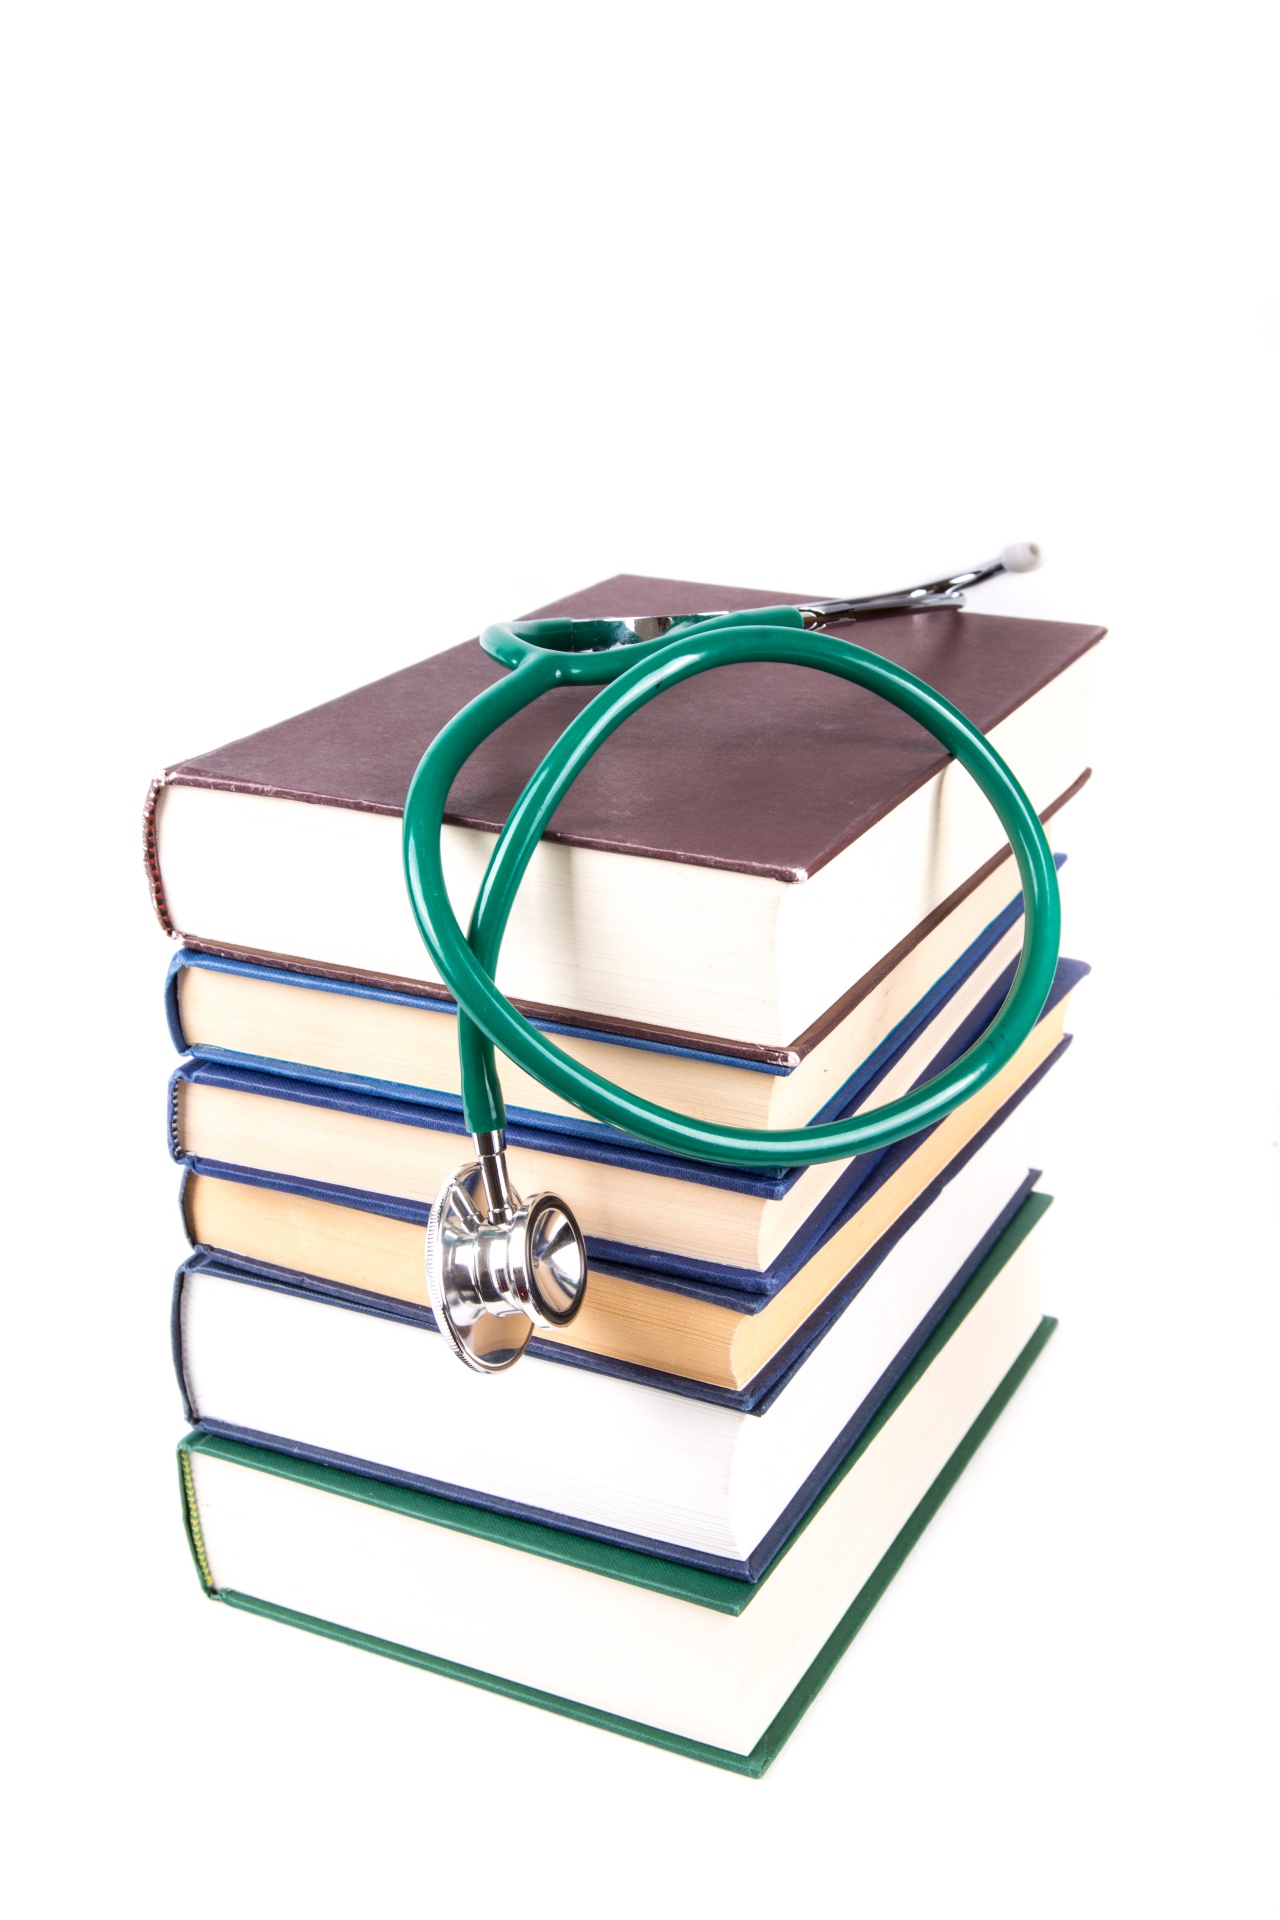 medical book learning free photo